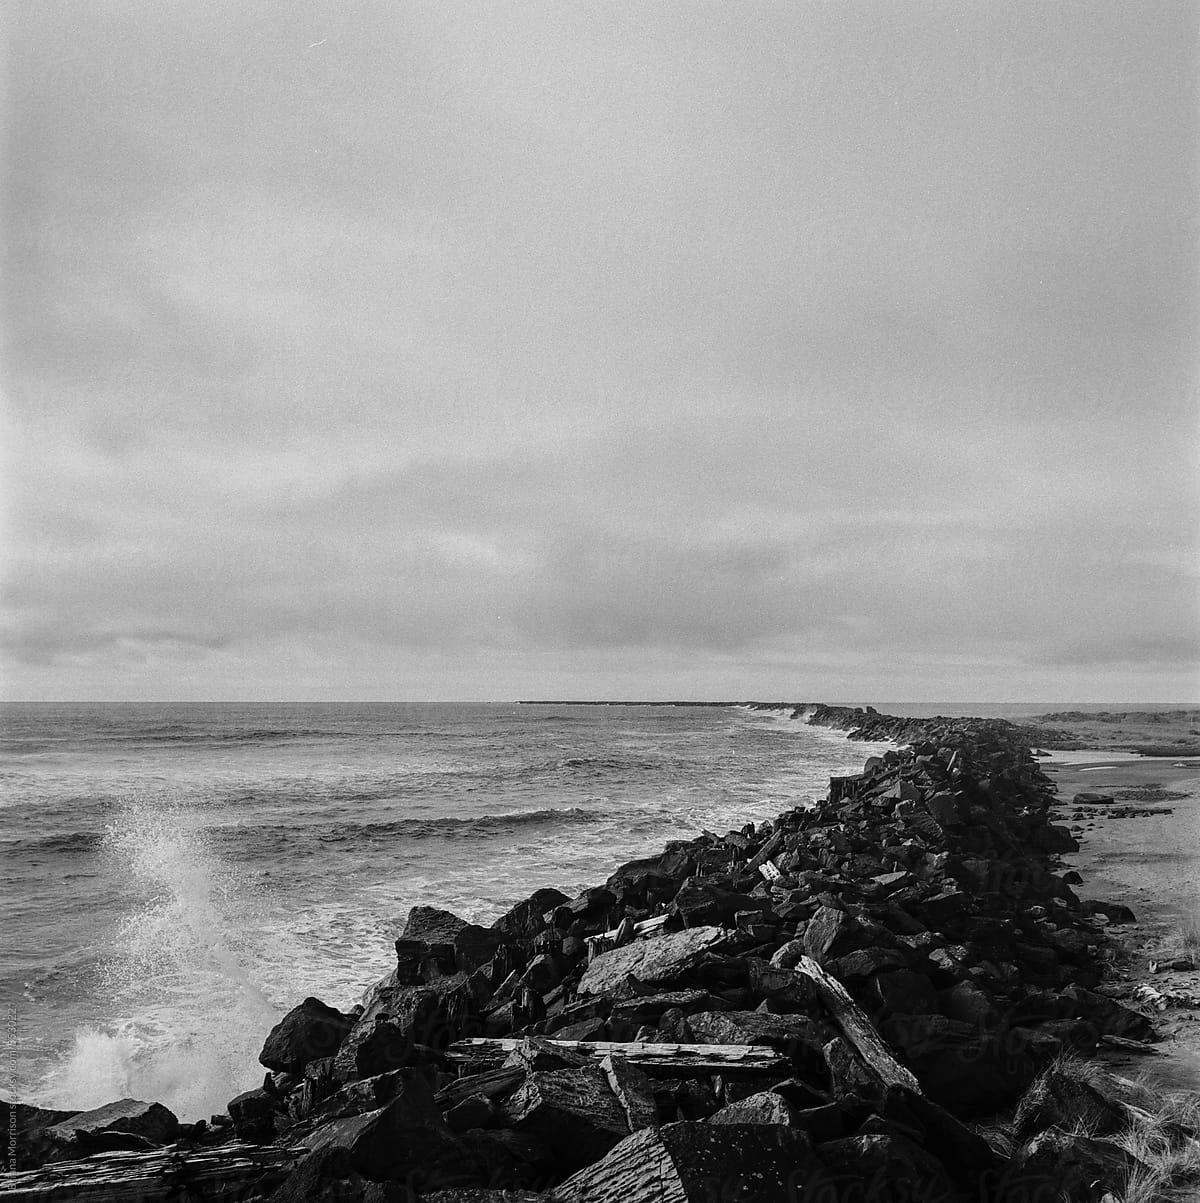 The Pacific Northwest Ocean and A Stone Jetty in Black and White